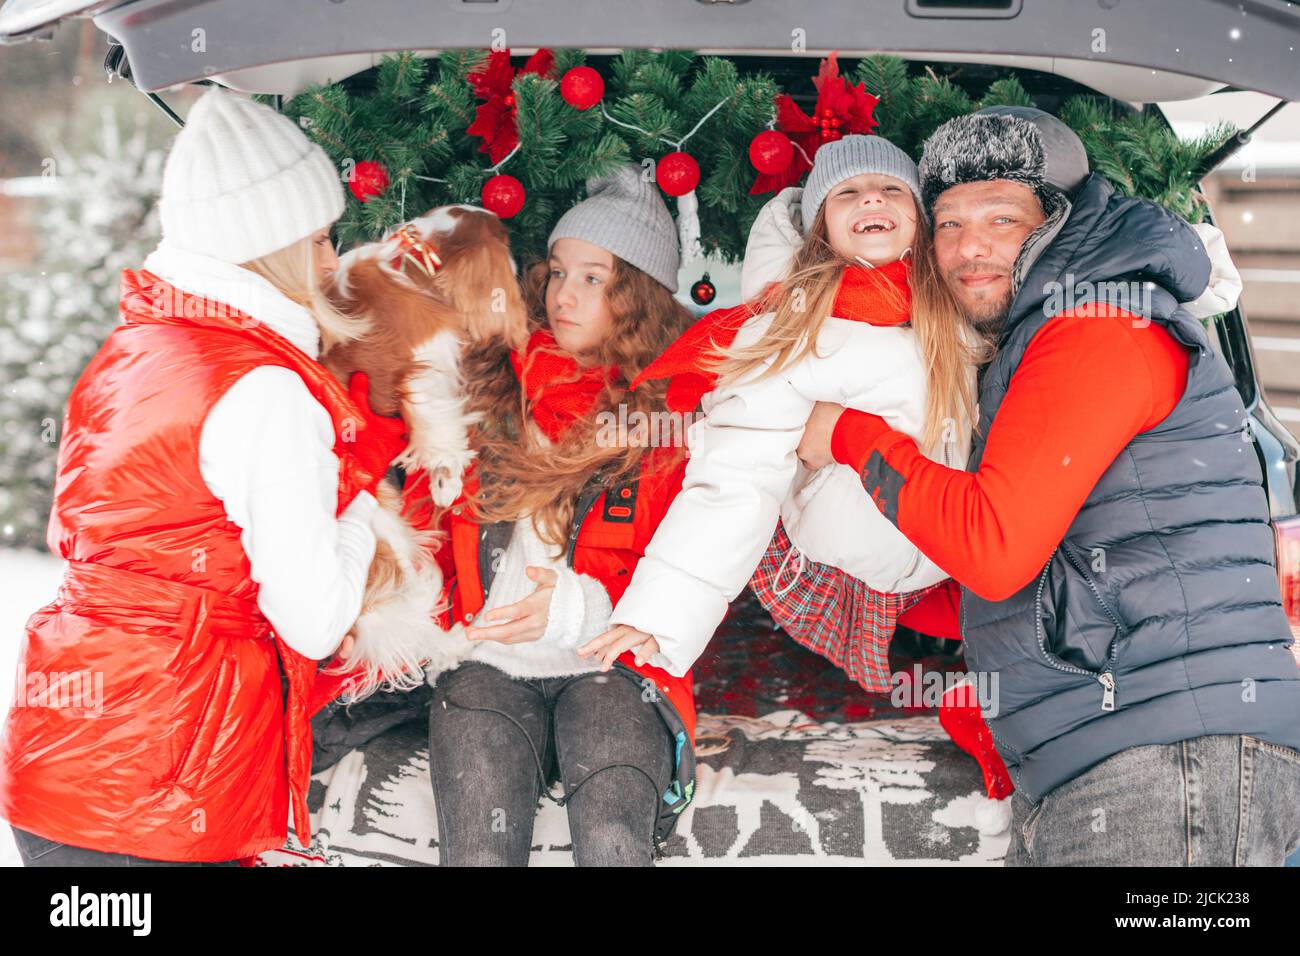 Happy winter moments for family with two children. Father, mother, girls spending time together with dog outdoors in car trunk with red Christmas Stock Photo